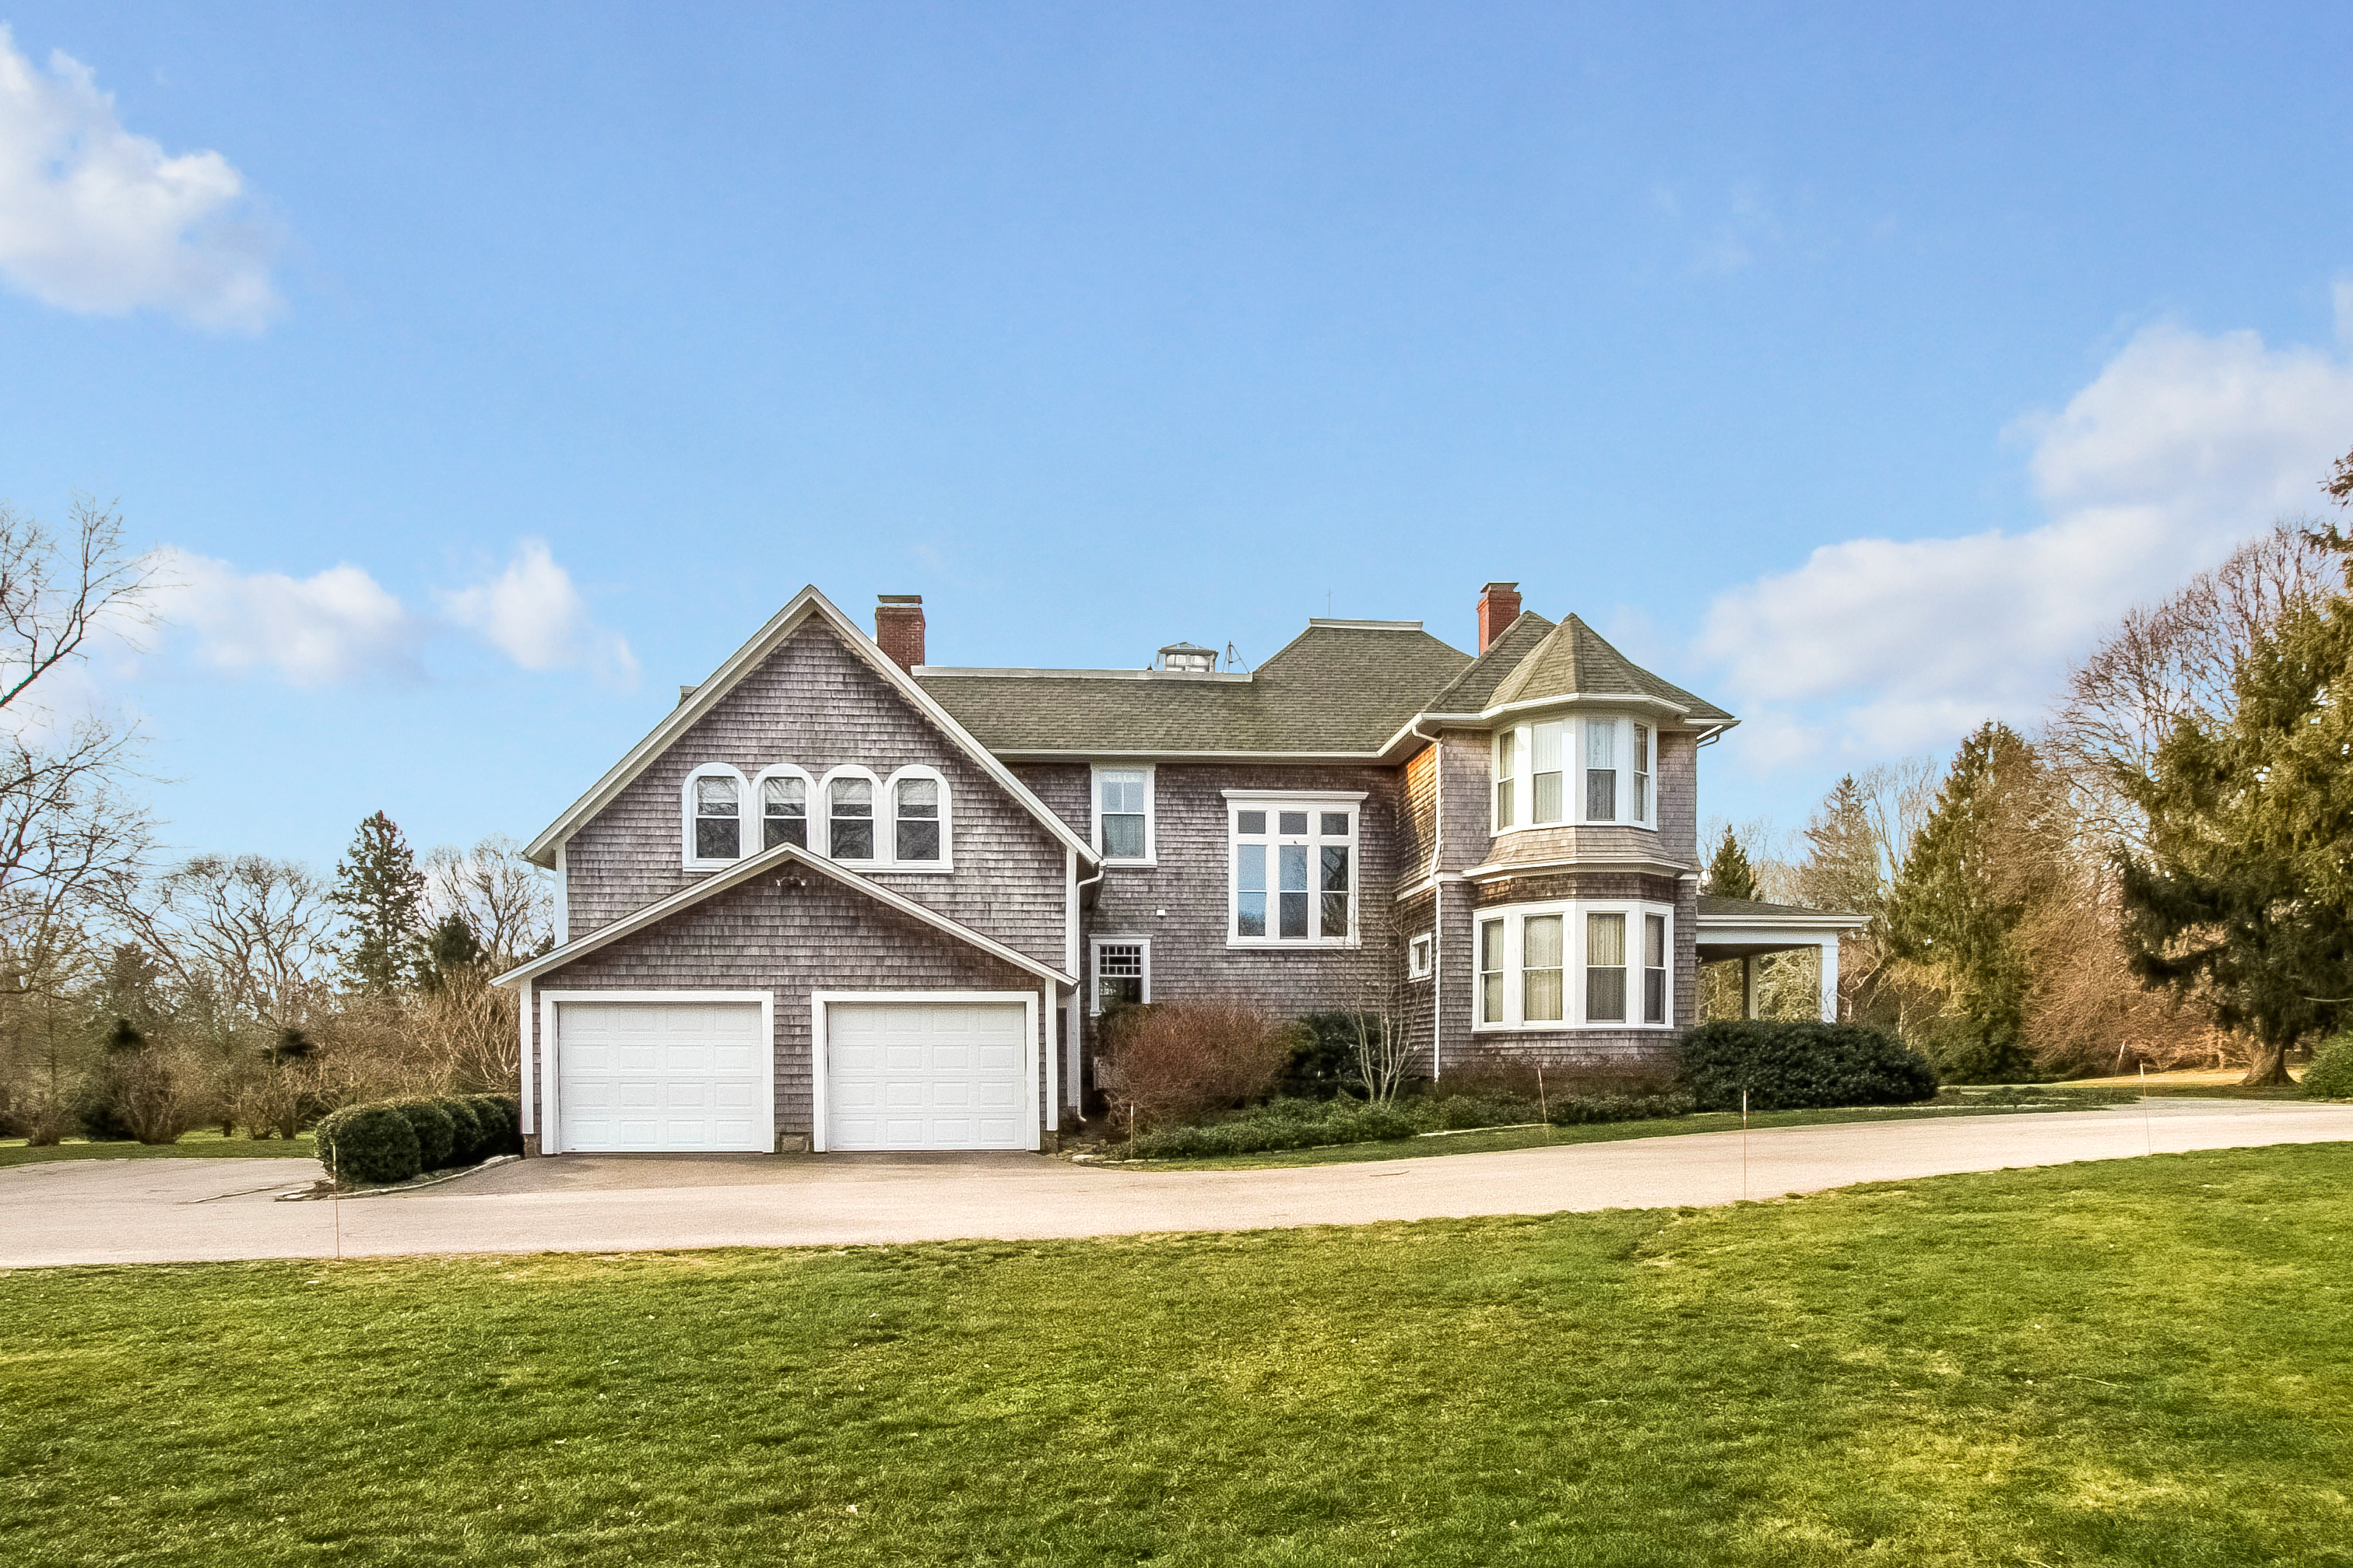 South Kingstown Property Featured as Providence Journal Home of the Week